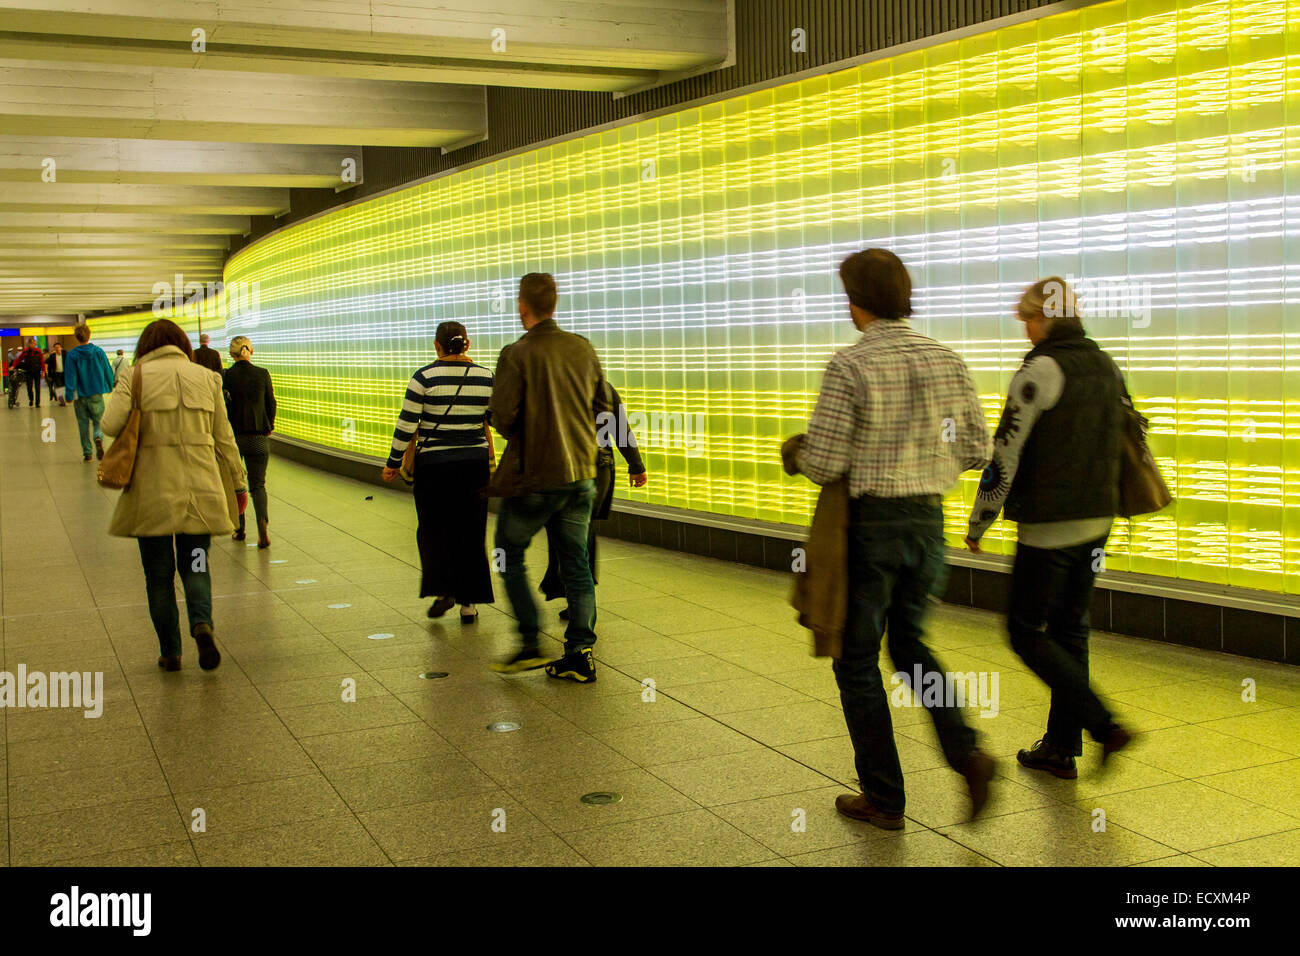 Passengers in an underground passage with a wall of lights Stock Photo